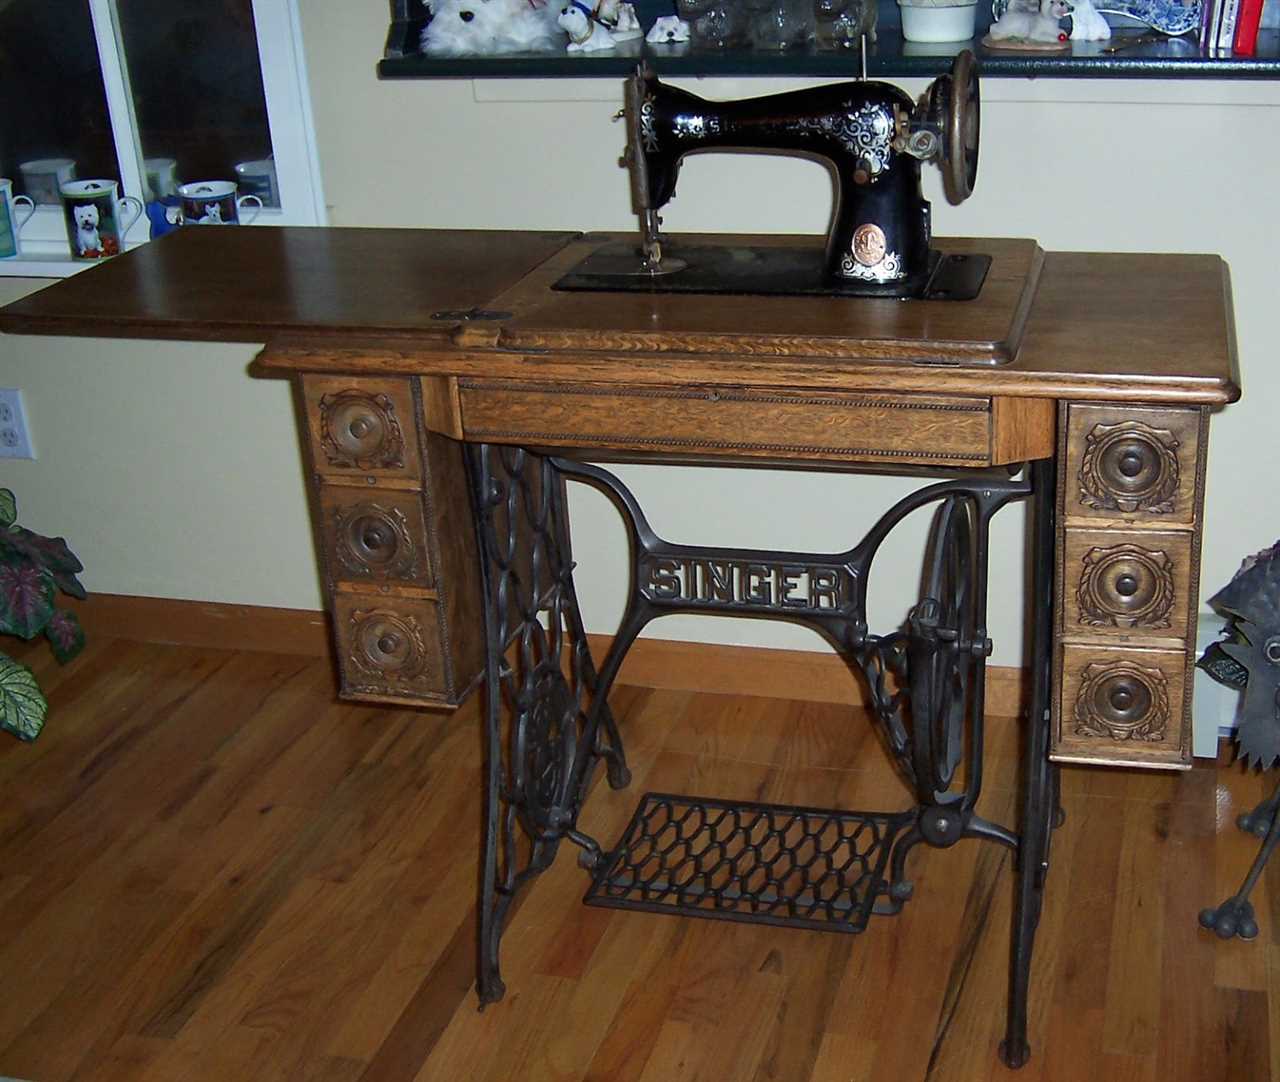 The History of Singer Sewing Machines